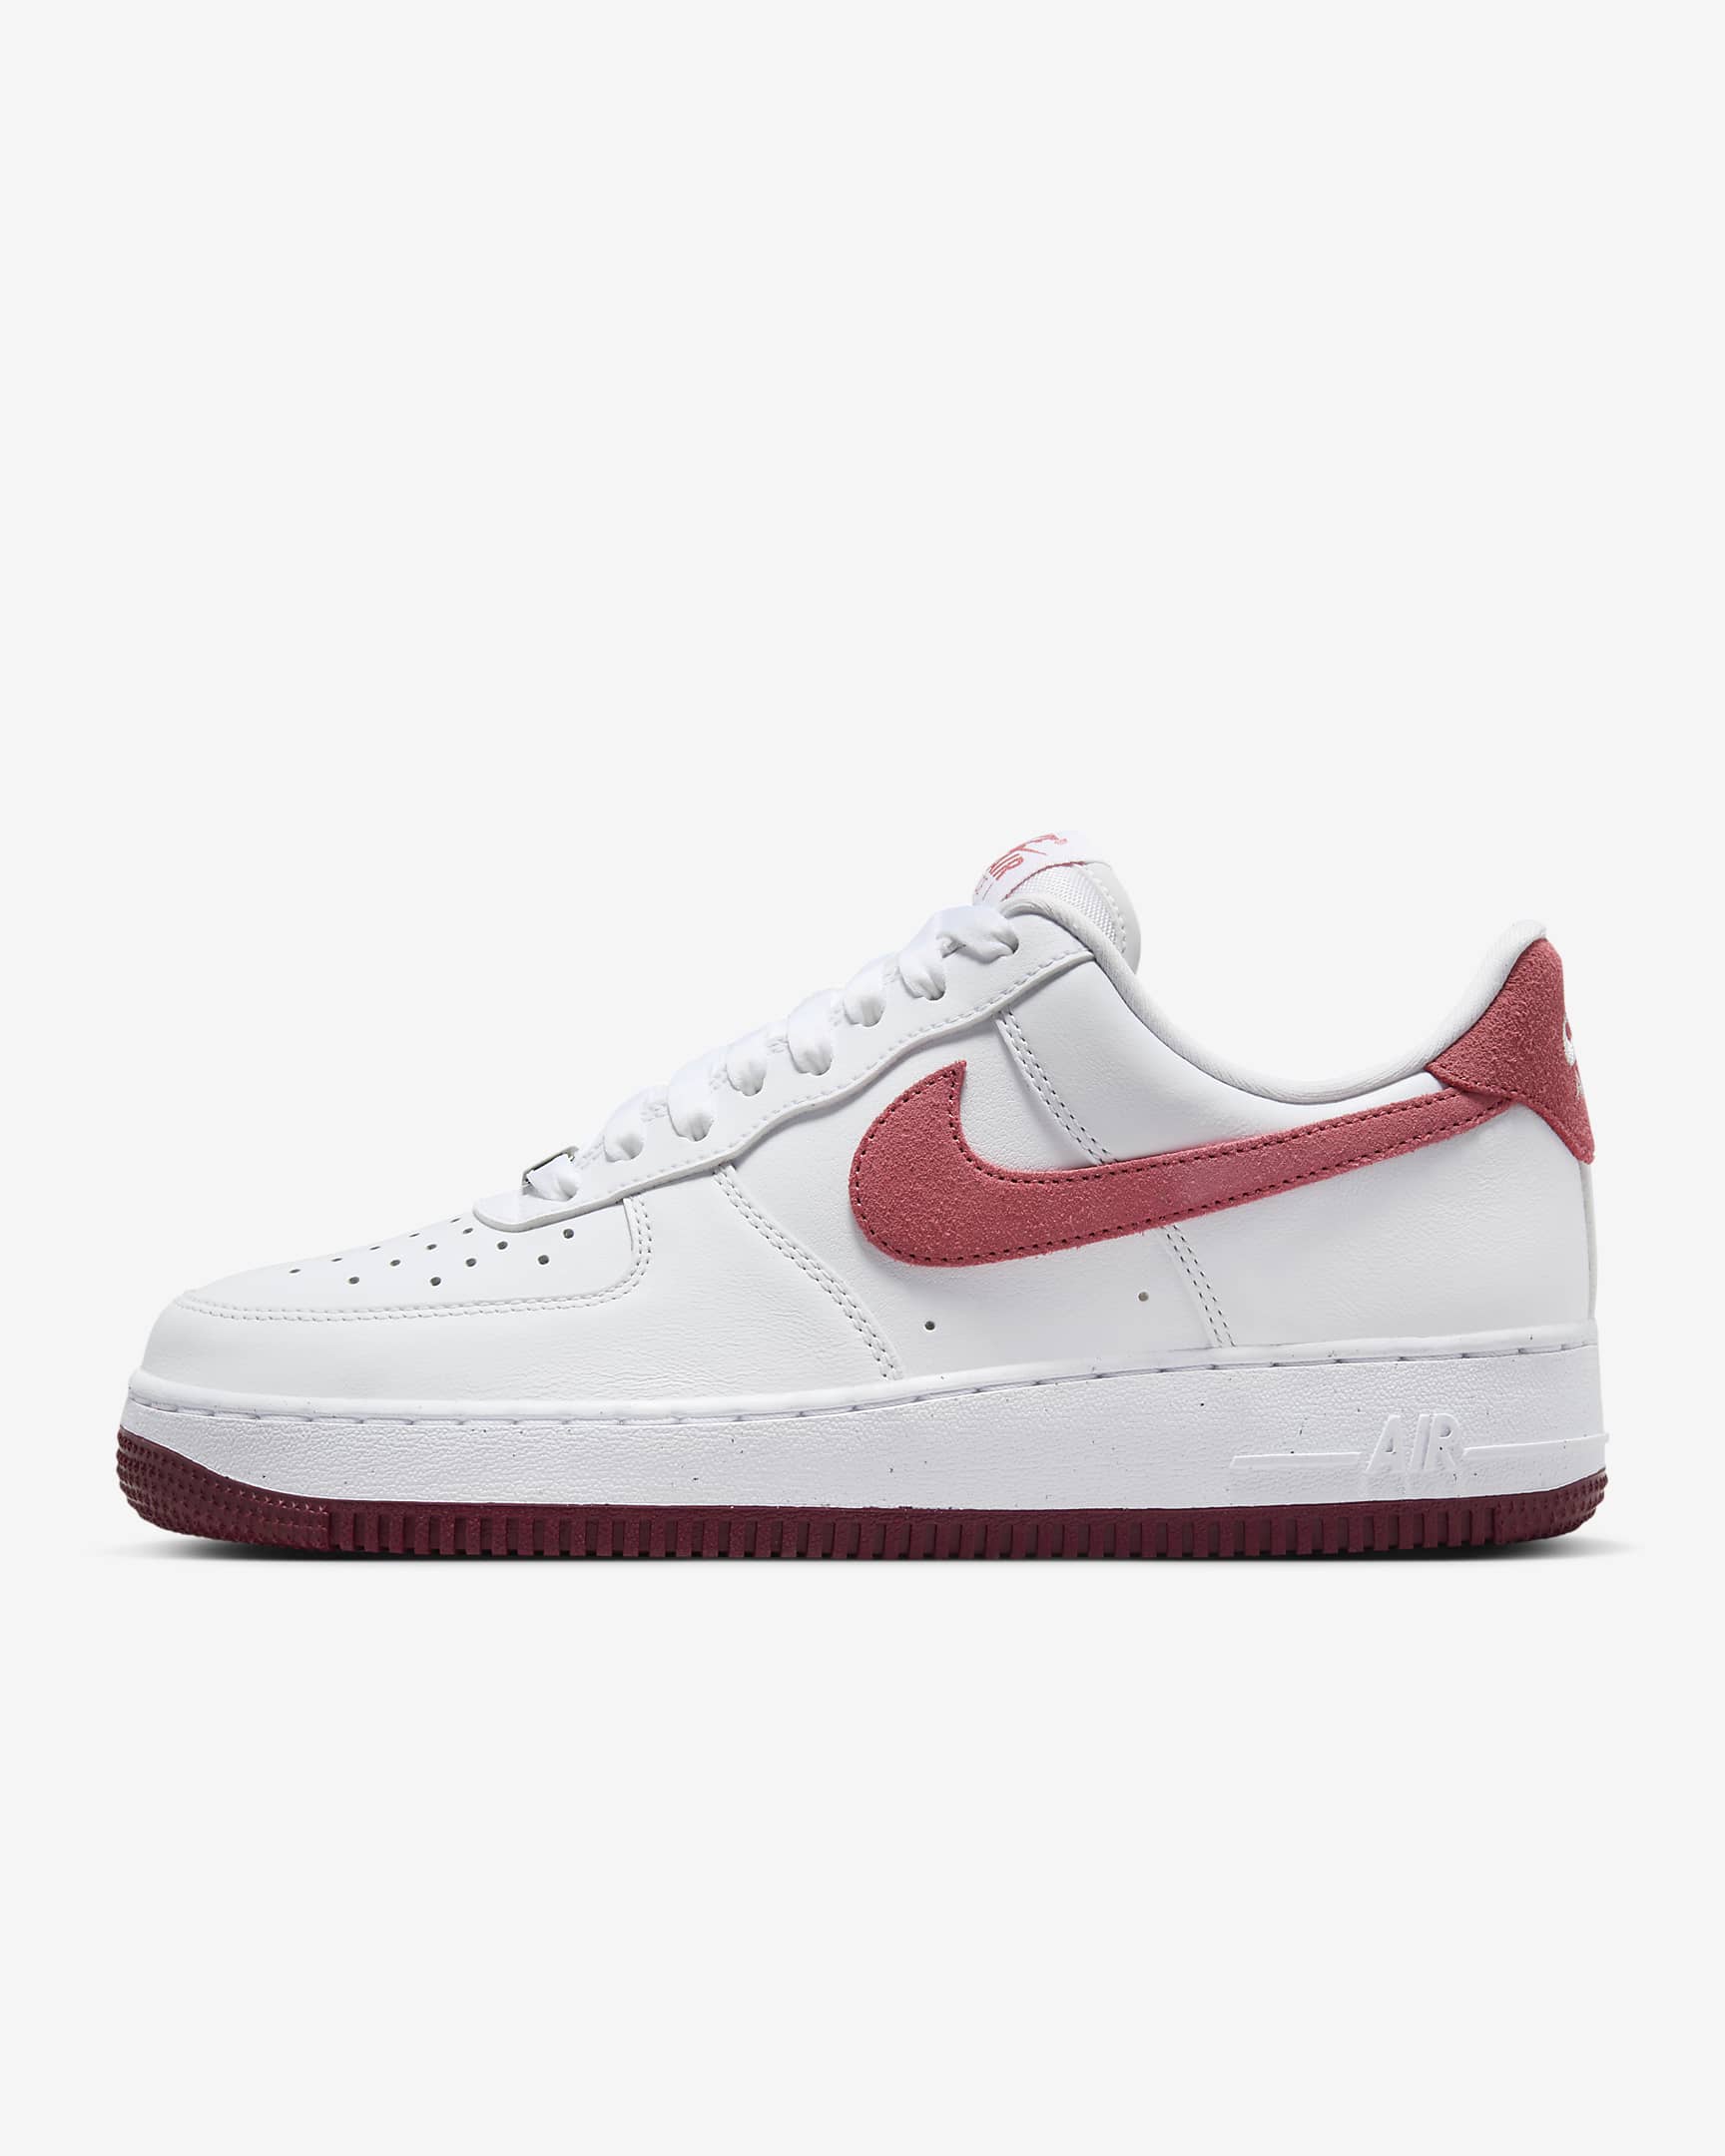 Nike Air Force 1 '07 Women's Shoes - White/Team Red/Dragon Red/Adobe